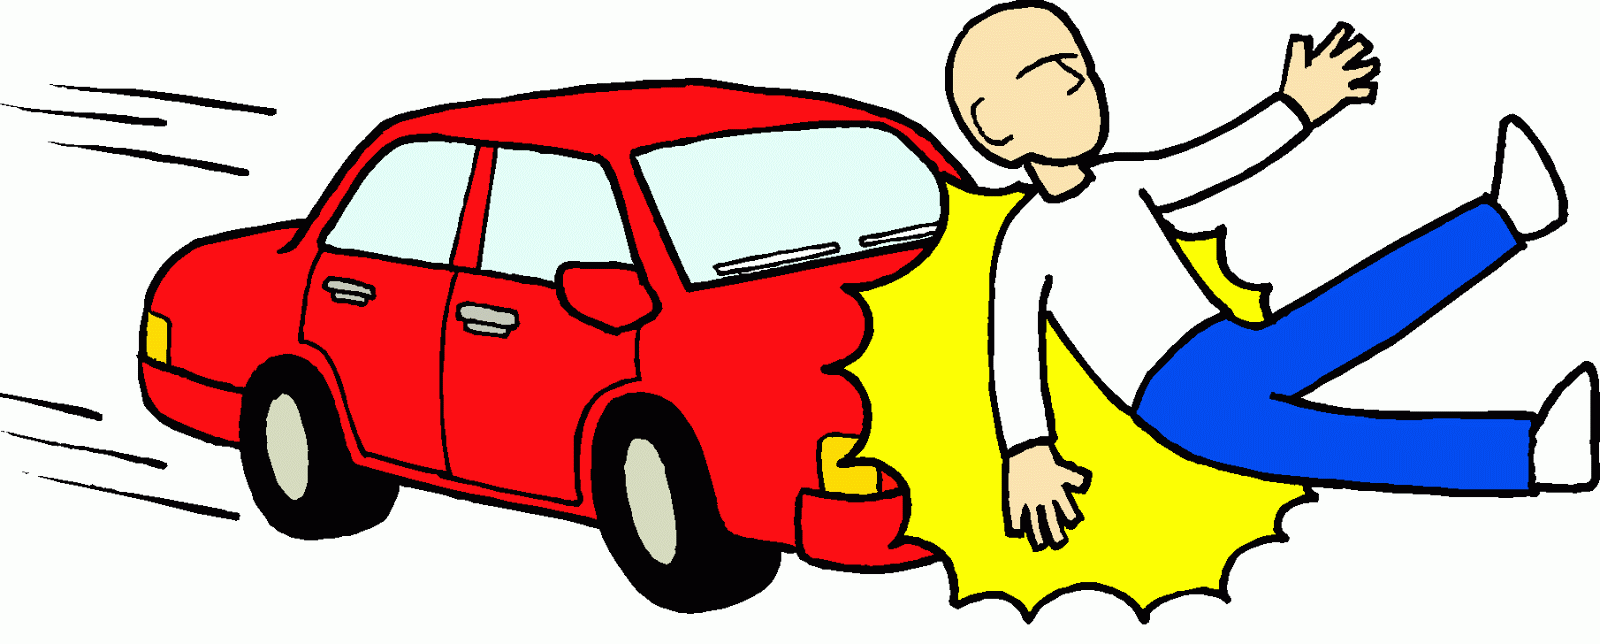 accident-clipart-10.jpg